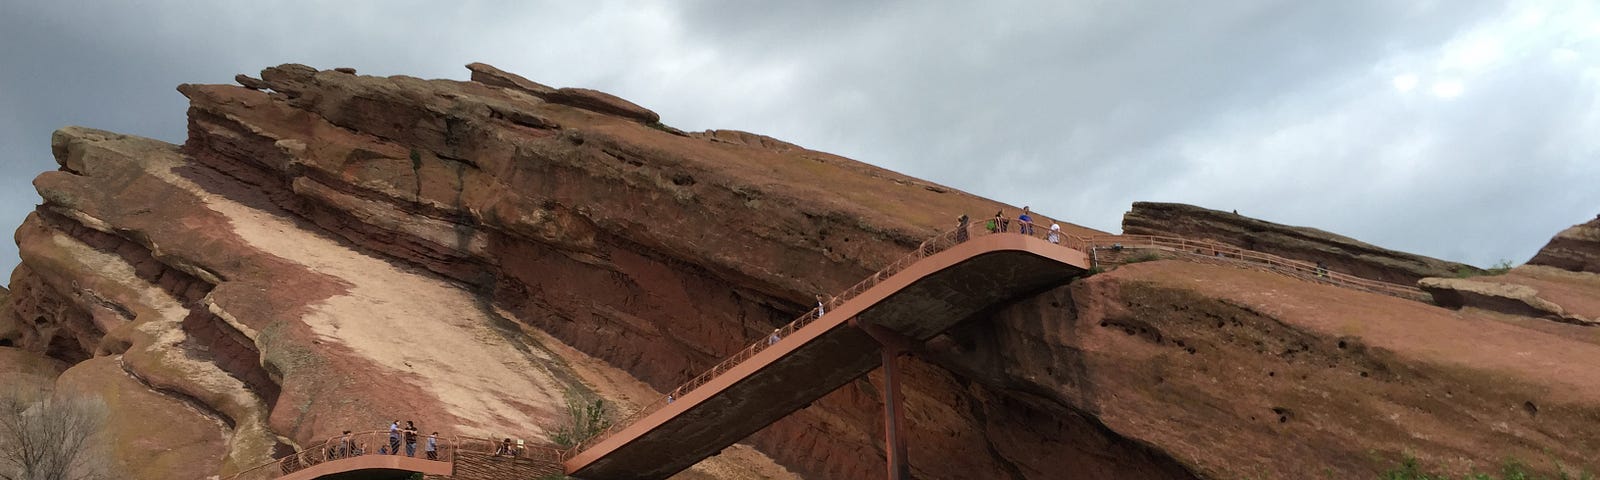 A view looking upward towards the Red Rocks Amphitheater entrance.